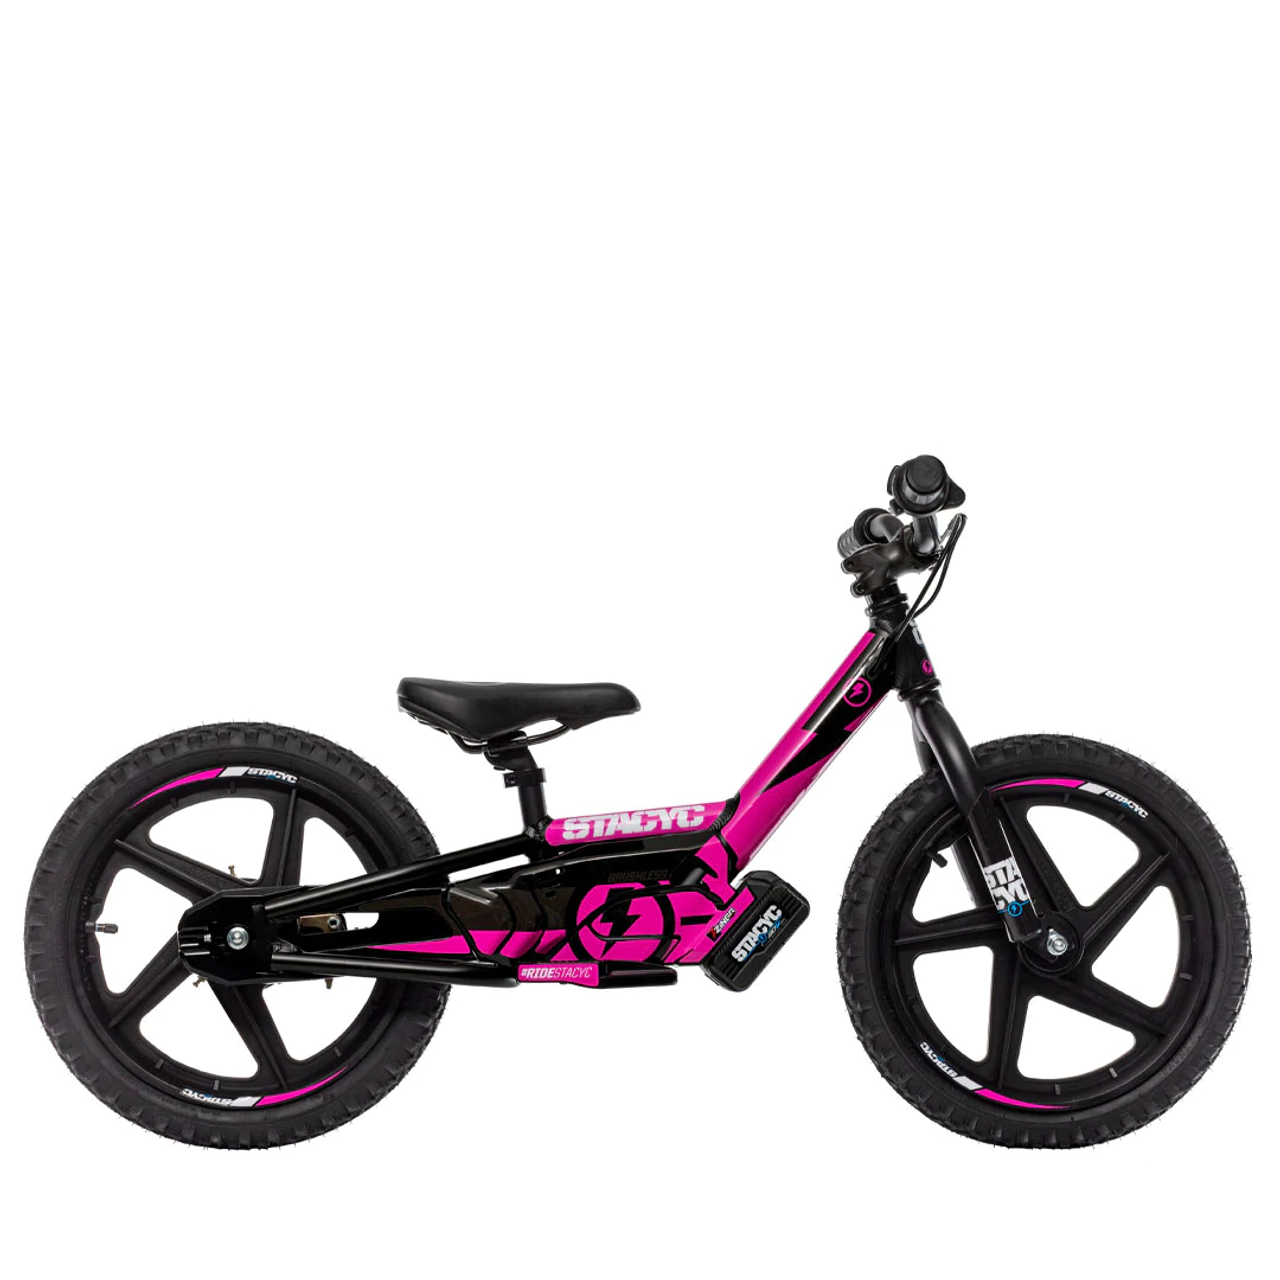 Stacyc Graphics Kit Decals Pink V2 16e